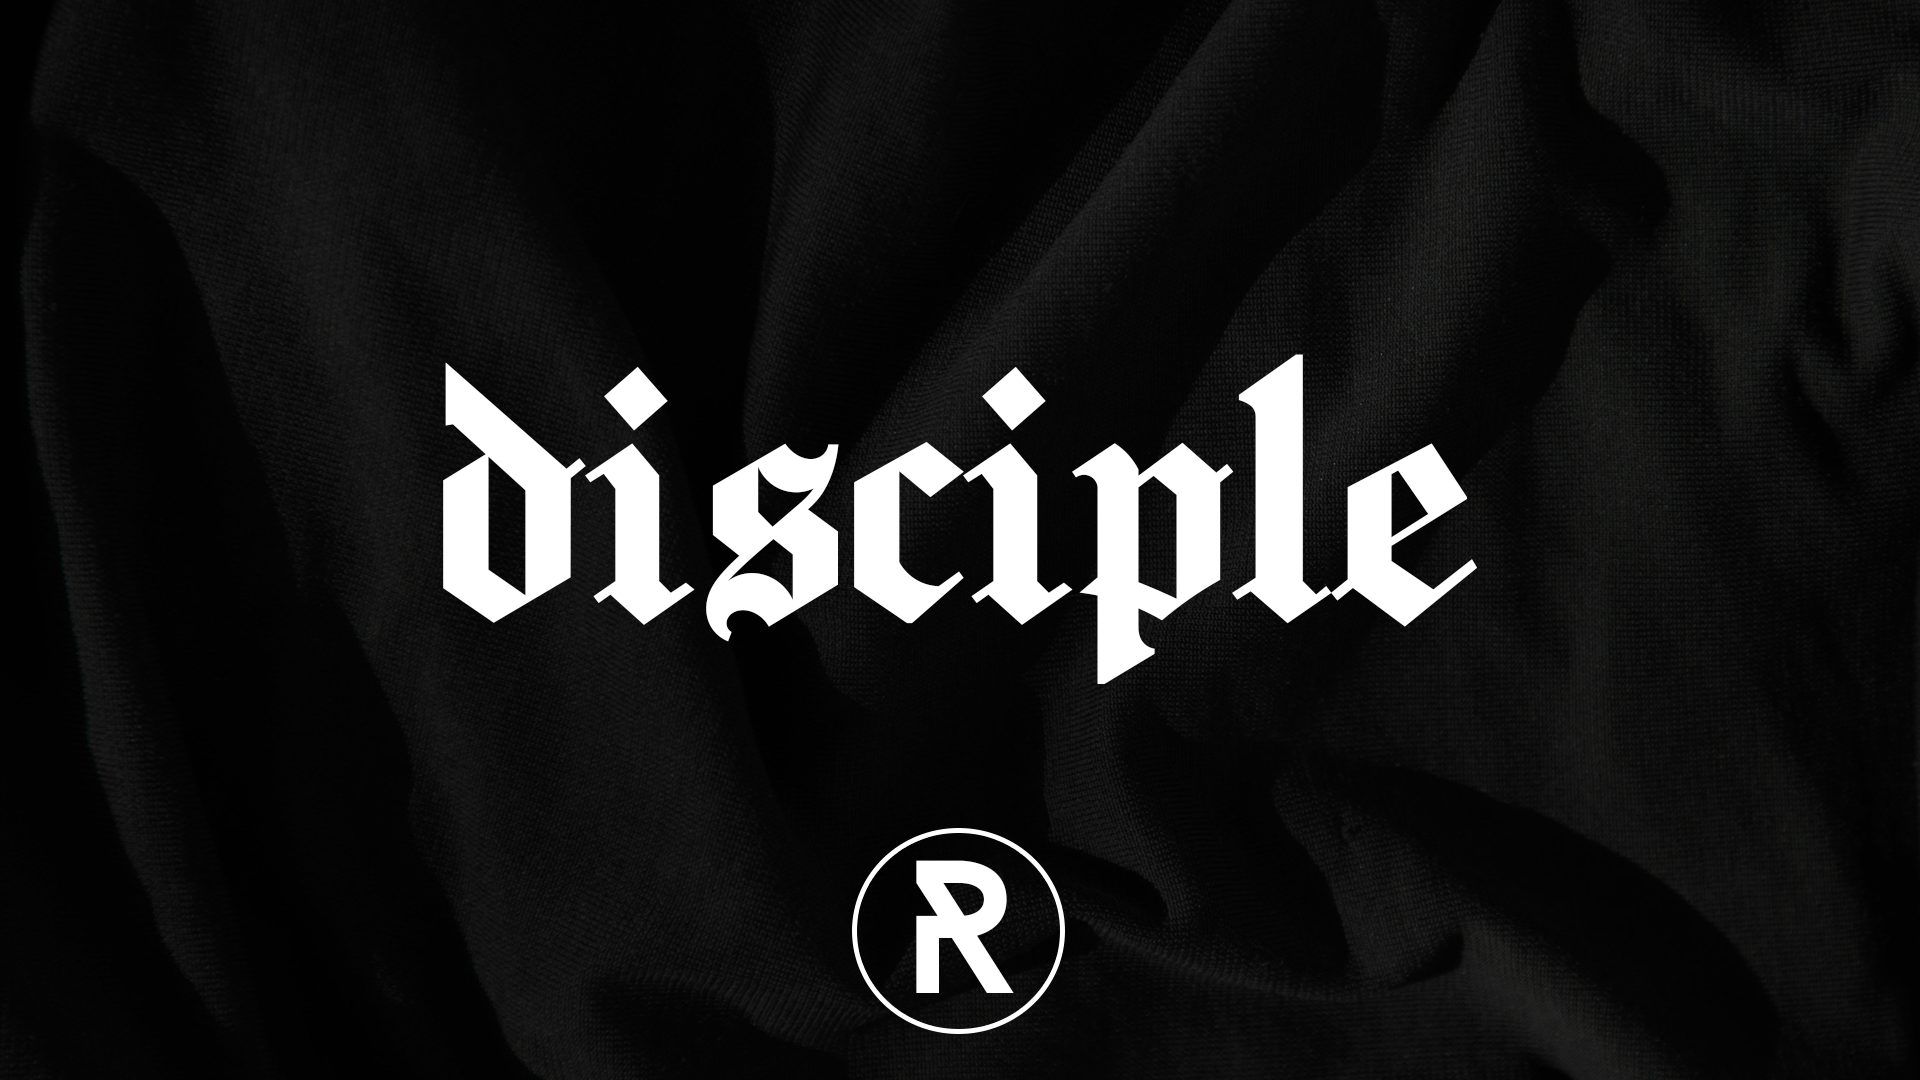 What is a Disciple